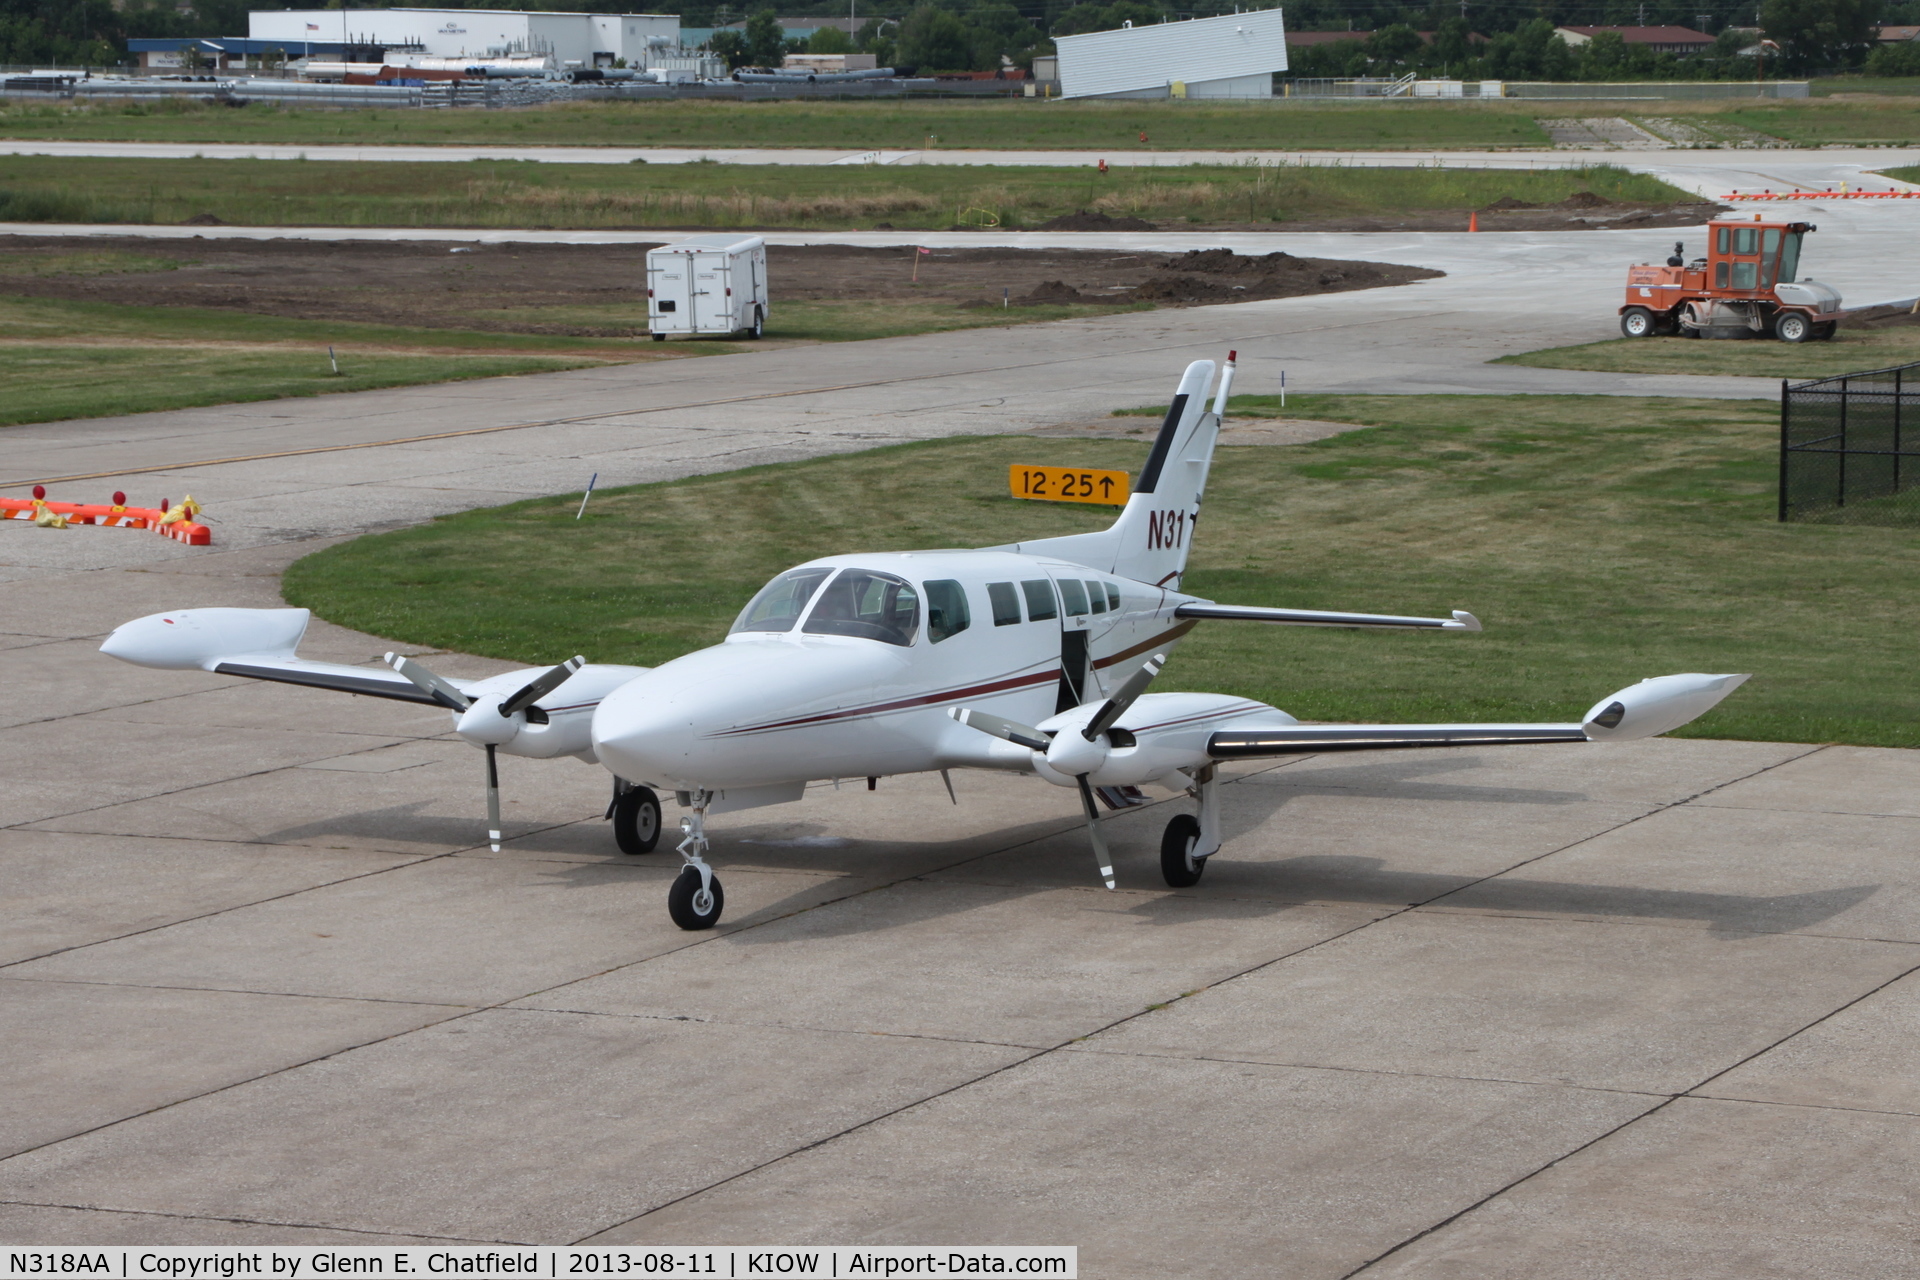 N318AA, 1975 Cessna 402B C/N 402B0854, Seen from the viewing point above the terminal.